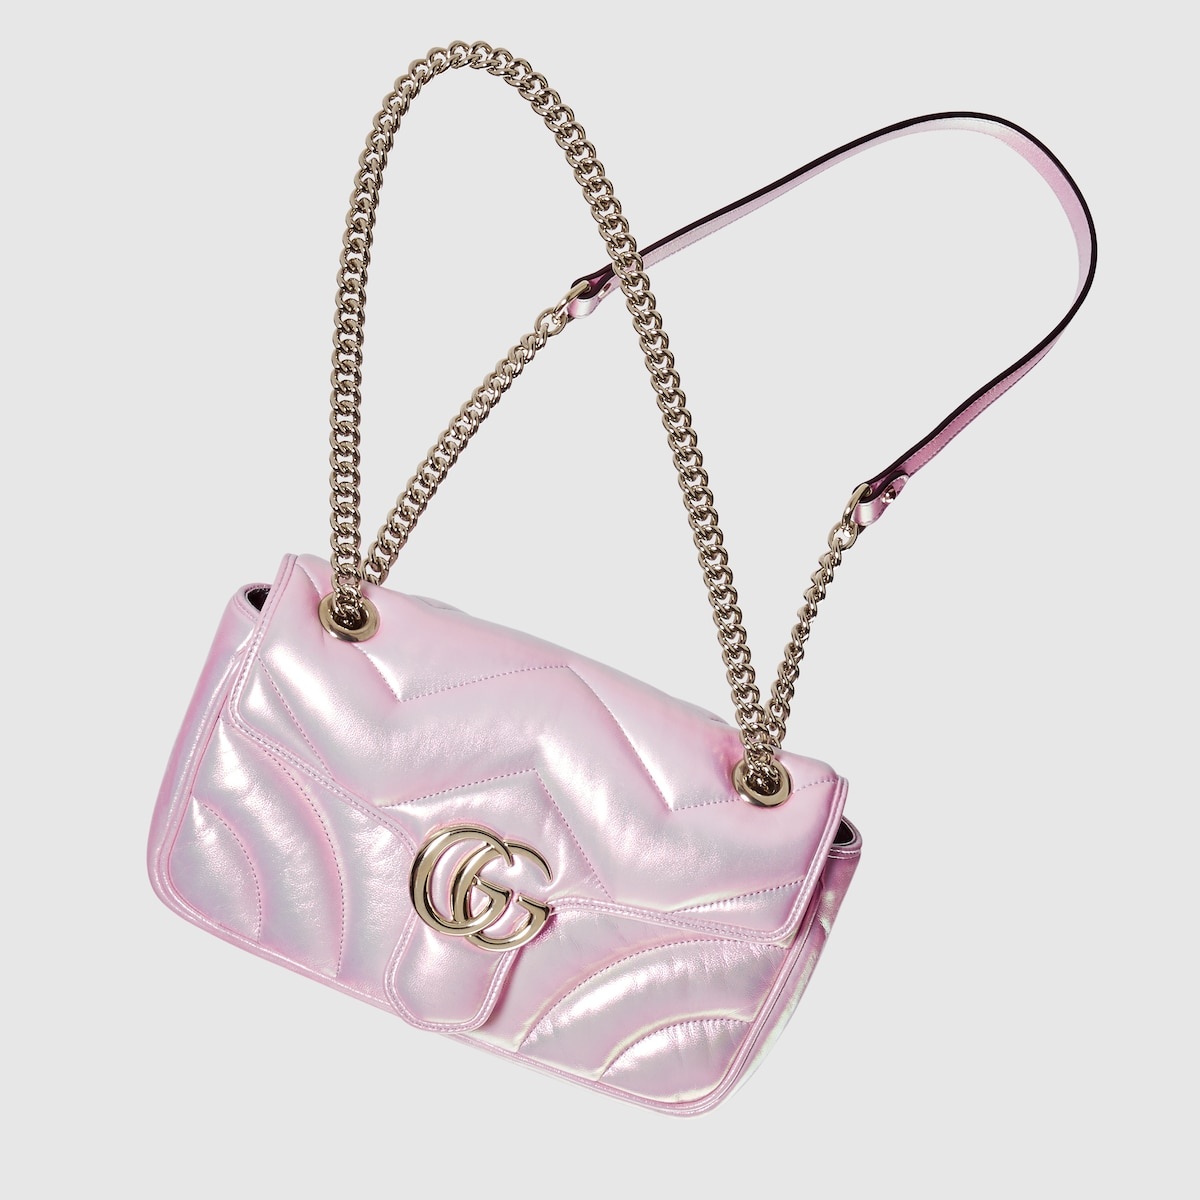 GG Marmont small shoulder bag - 5